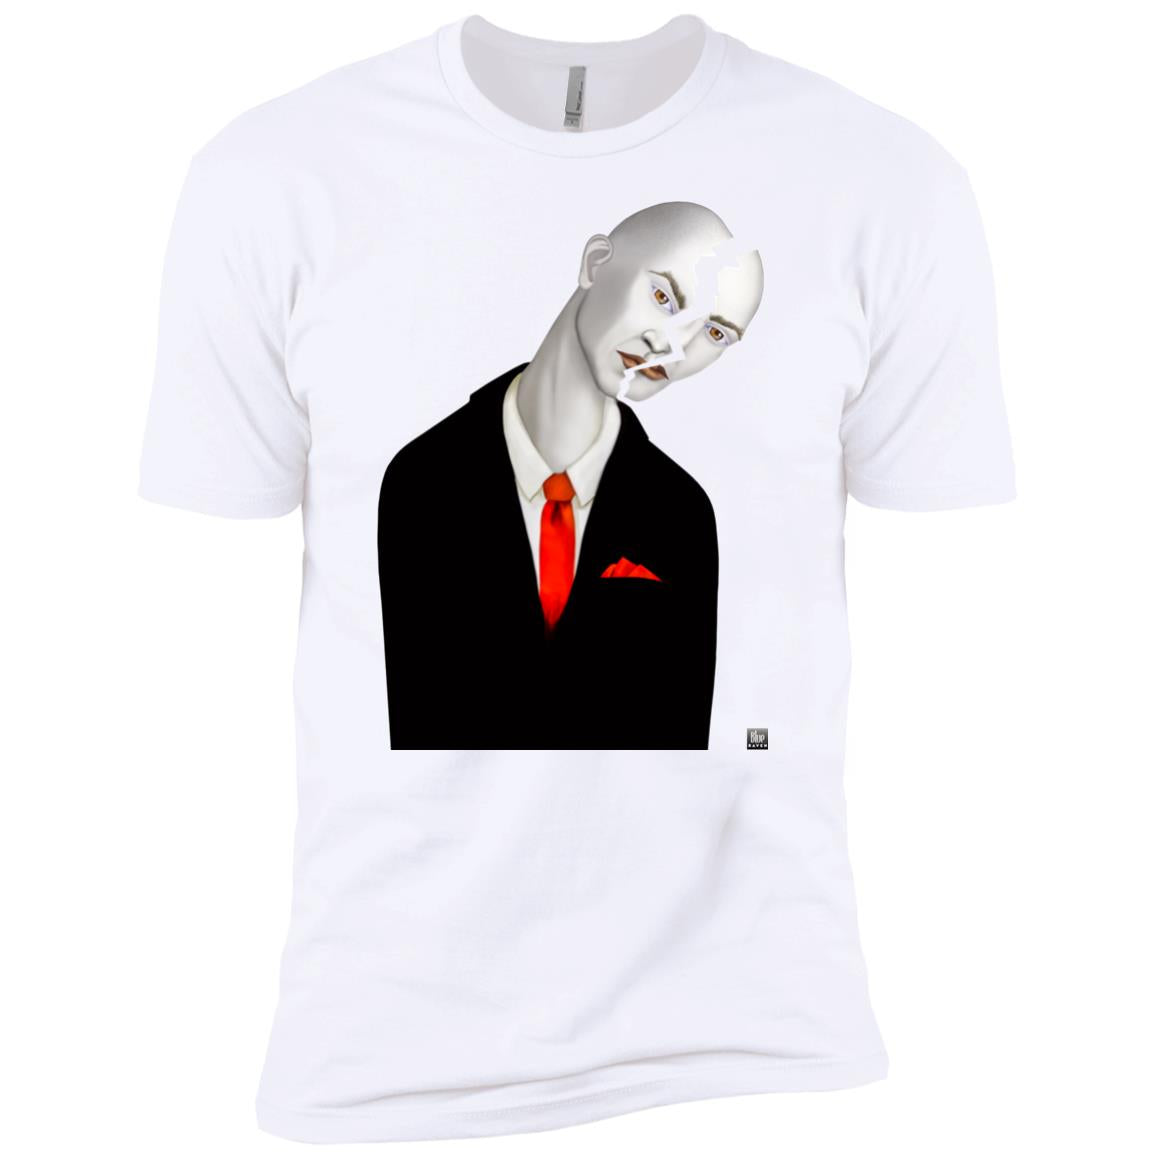 CRACKED UP - Men's Premium Fitted T-Shirt